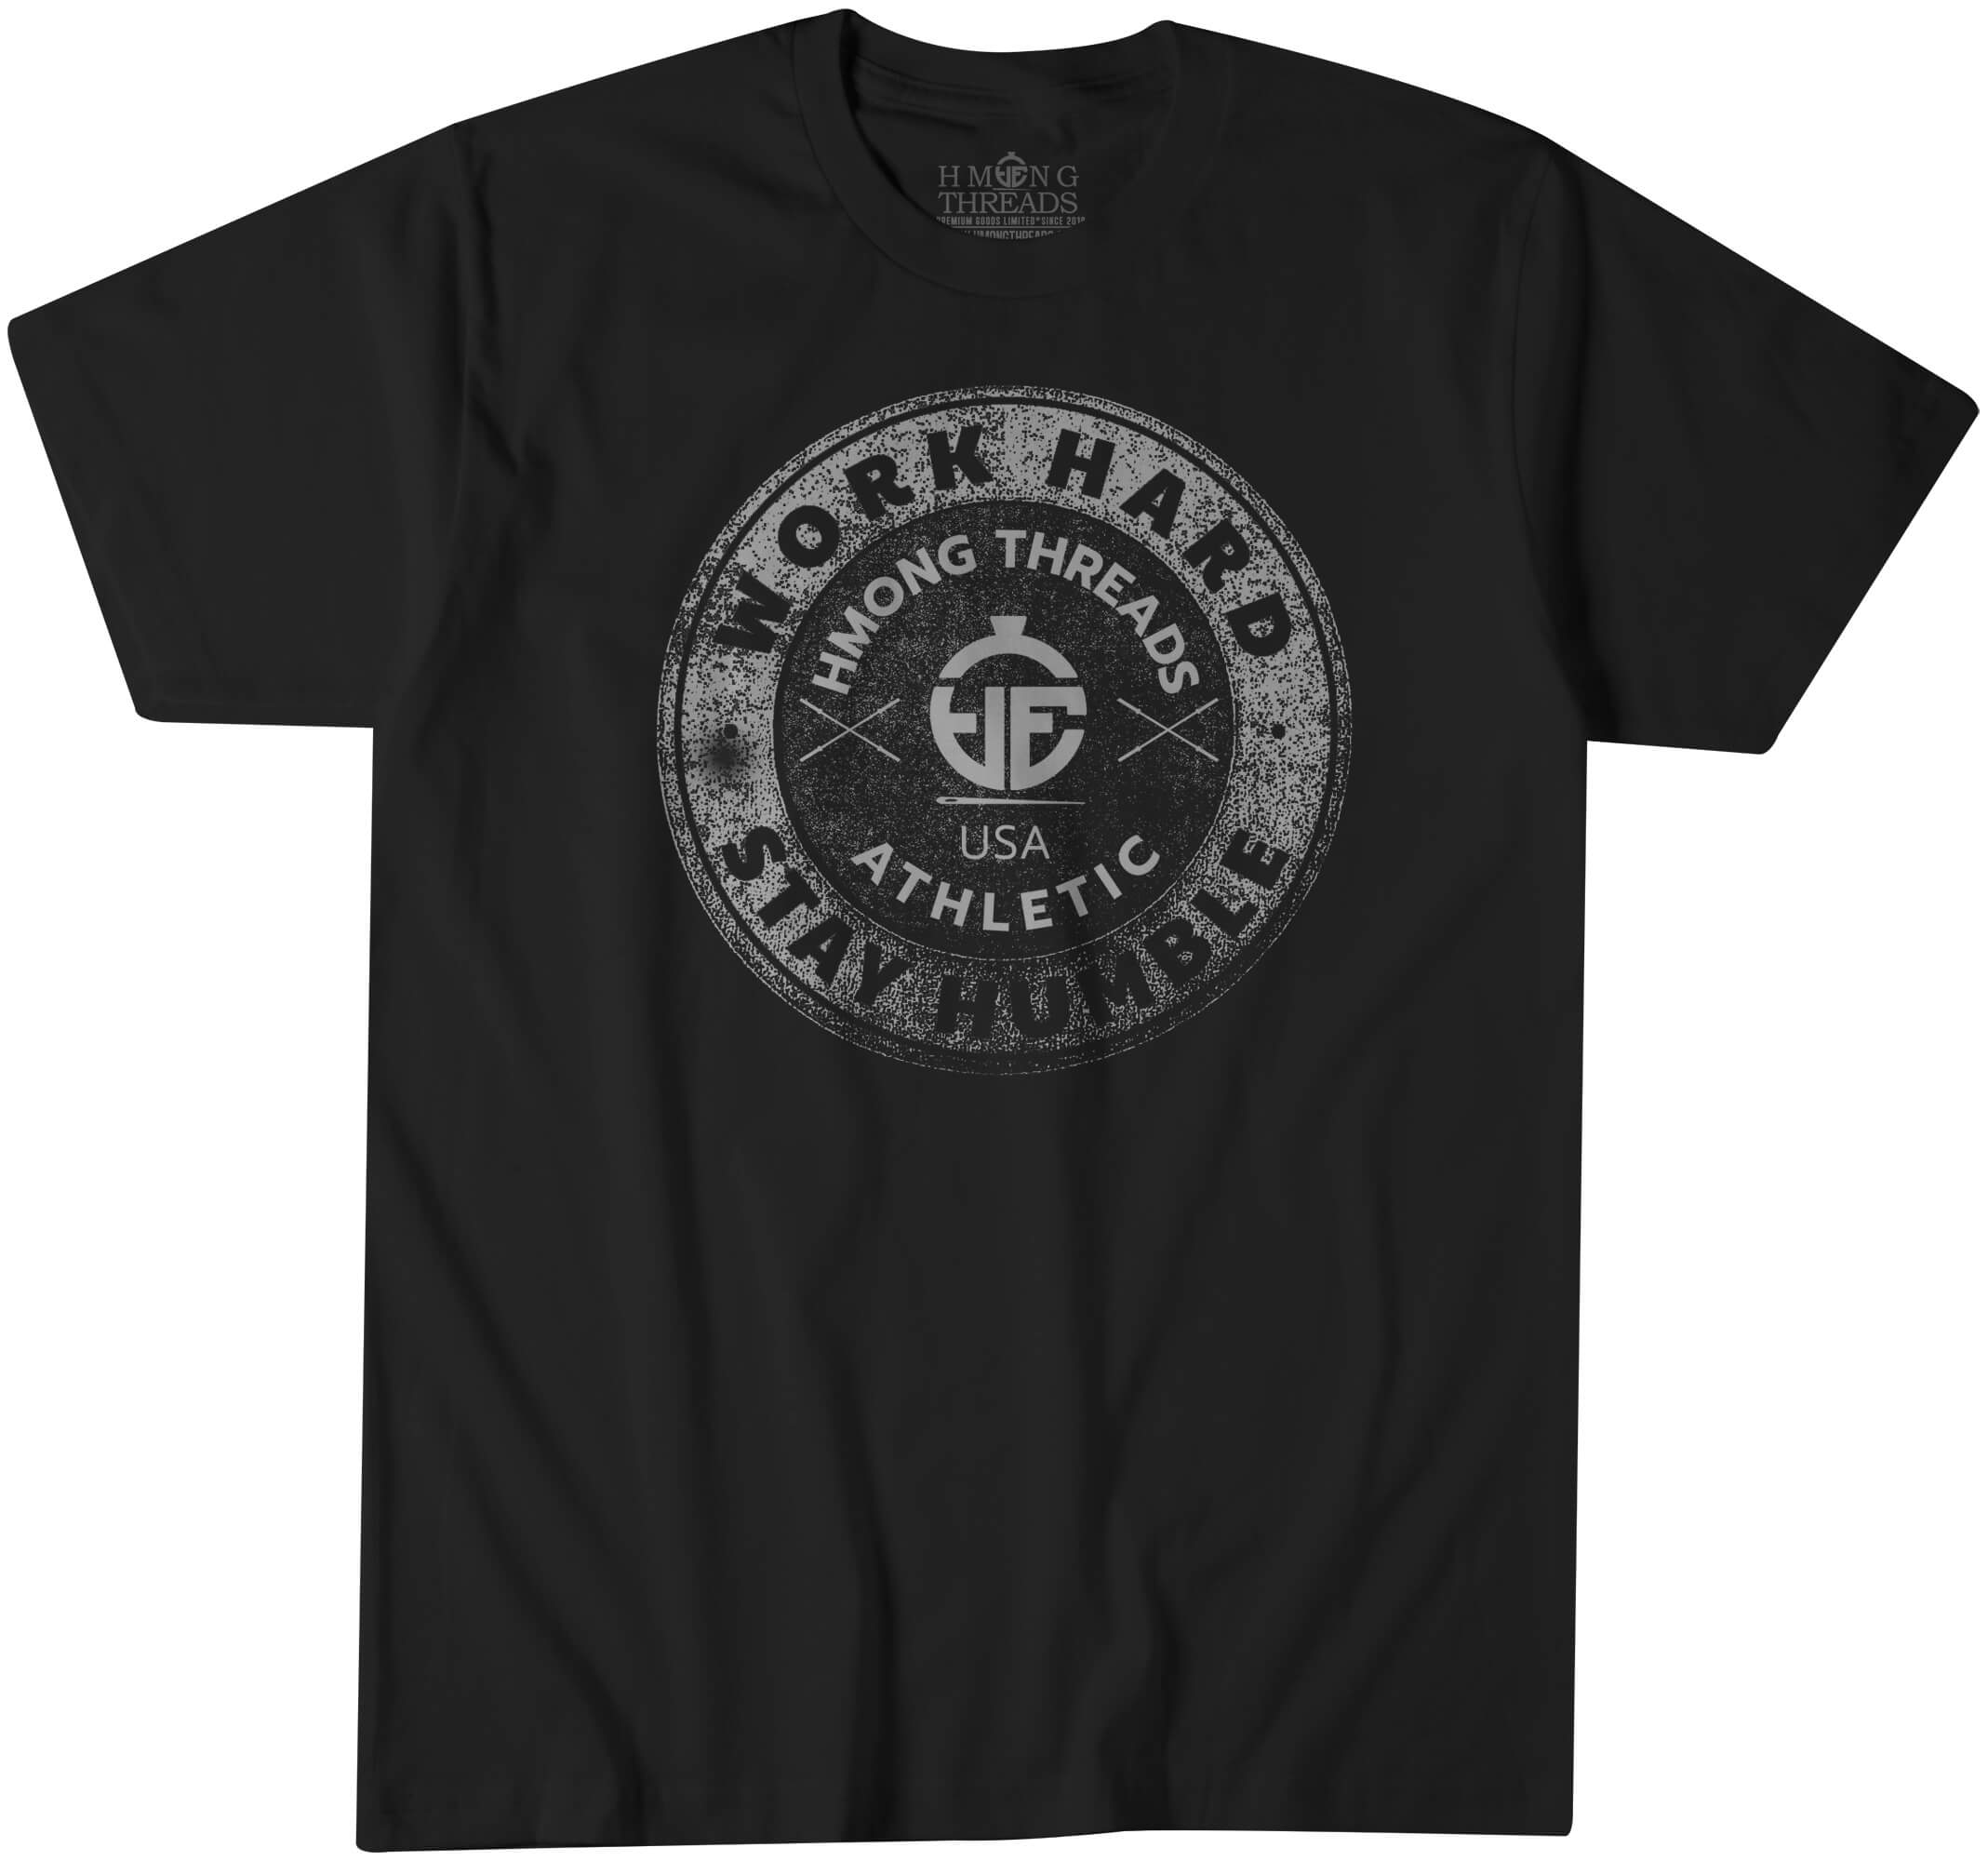 WORK HARD, STAY HUMBLE - ATHLETIC APPAREL BLACK - HMONG THREADS